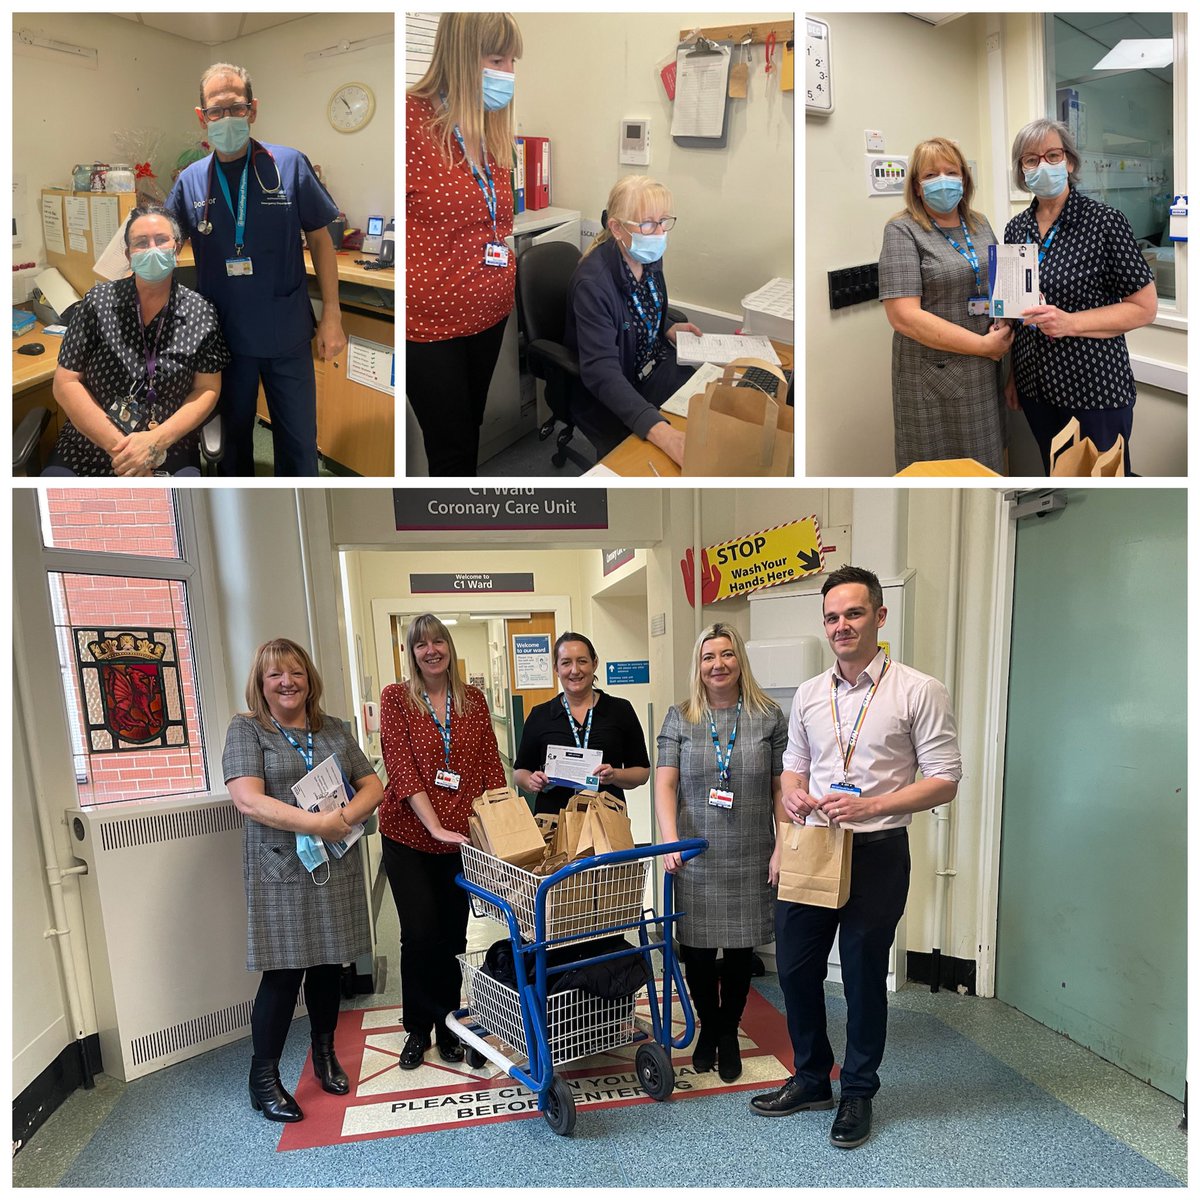 Today, as part of warm up to winter improvement
week we have been thanking our amazing ward clerks
in Acute Adult Care for everything they do! We also
raised awareness about the importance of their role
with colleagues from data quality #thankyou
#knowyourpatient @boltonnhsft